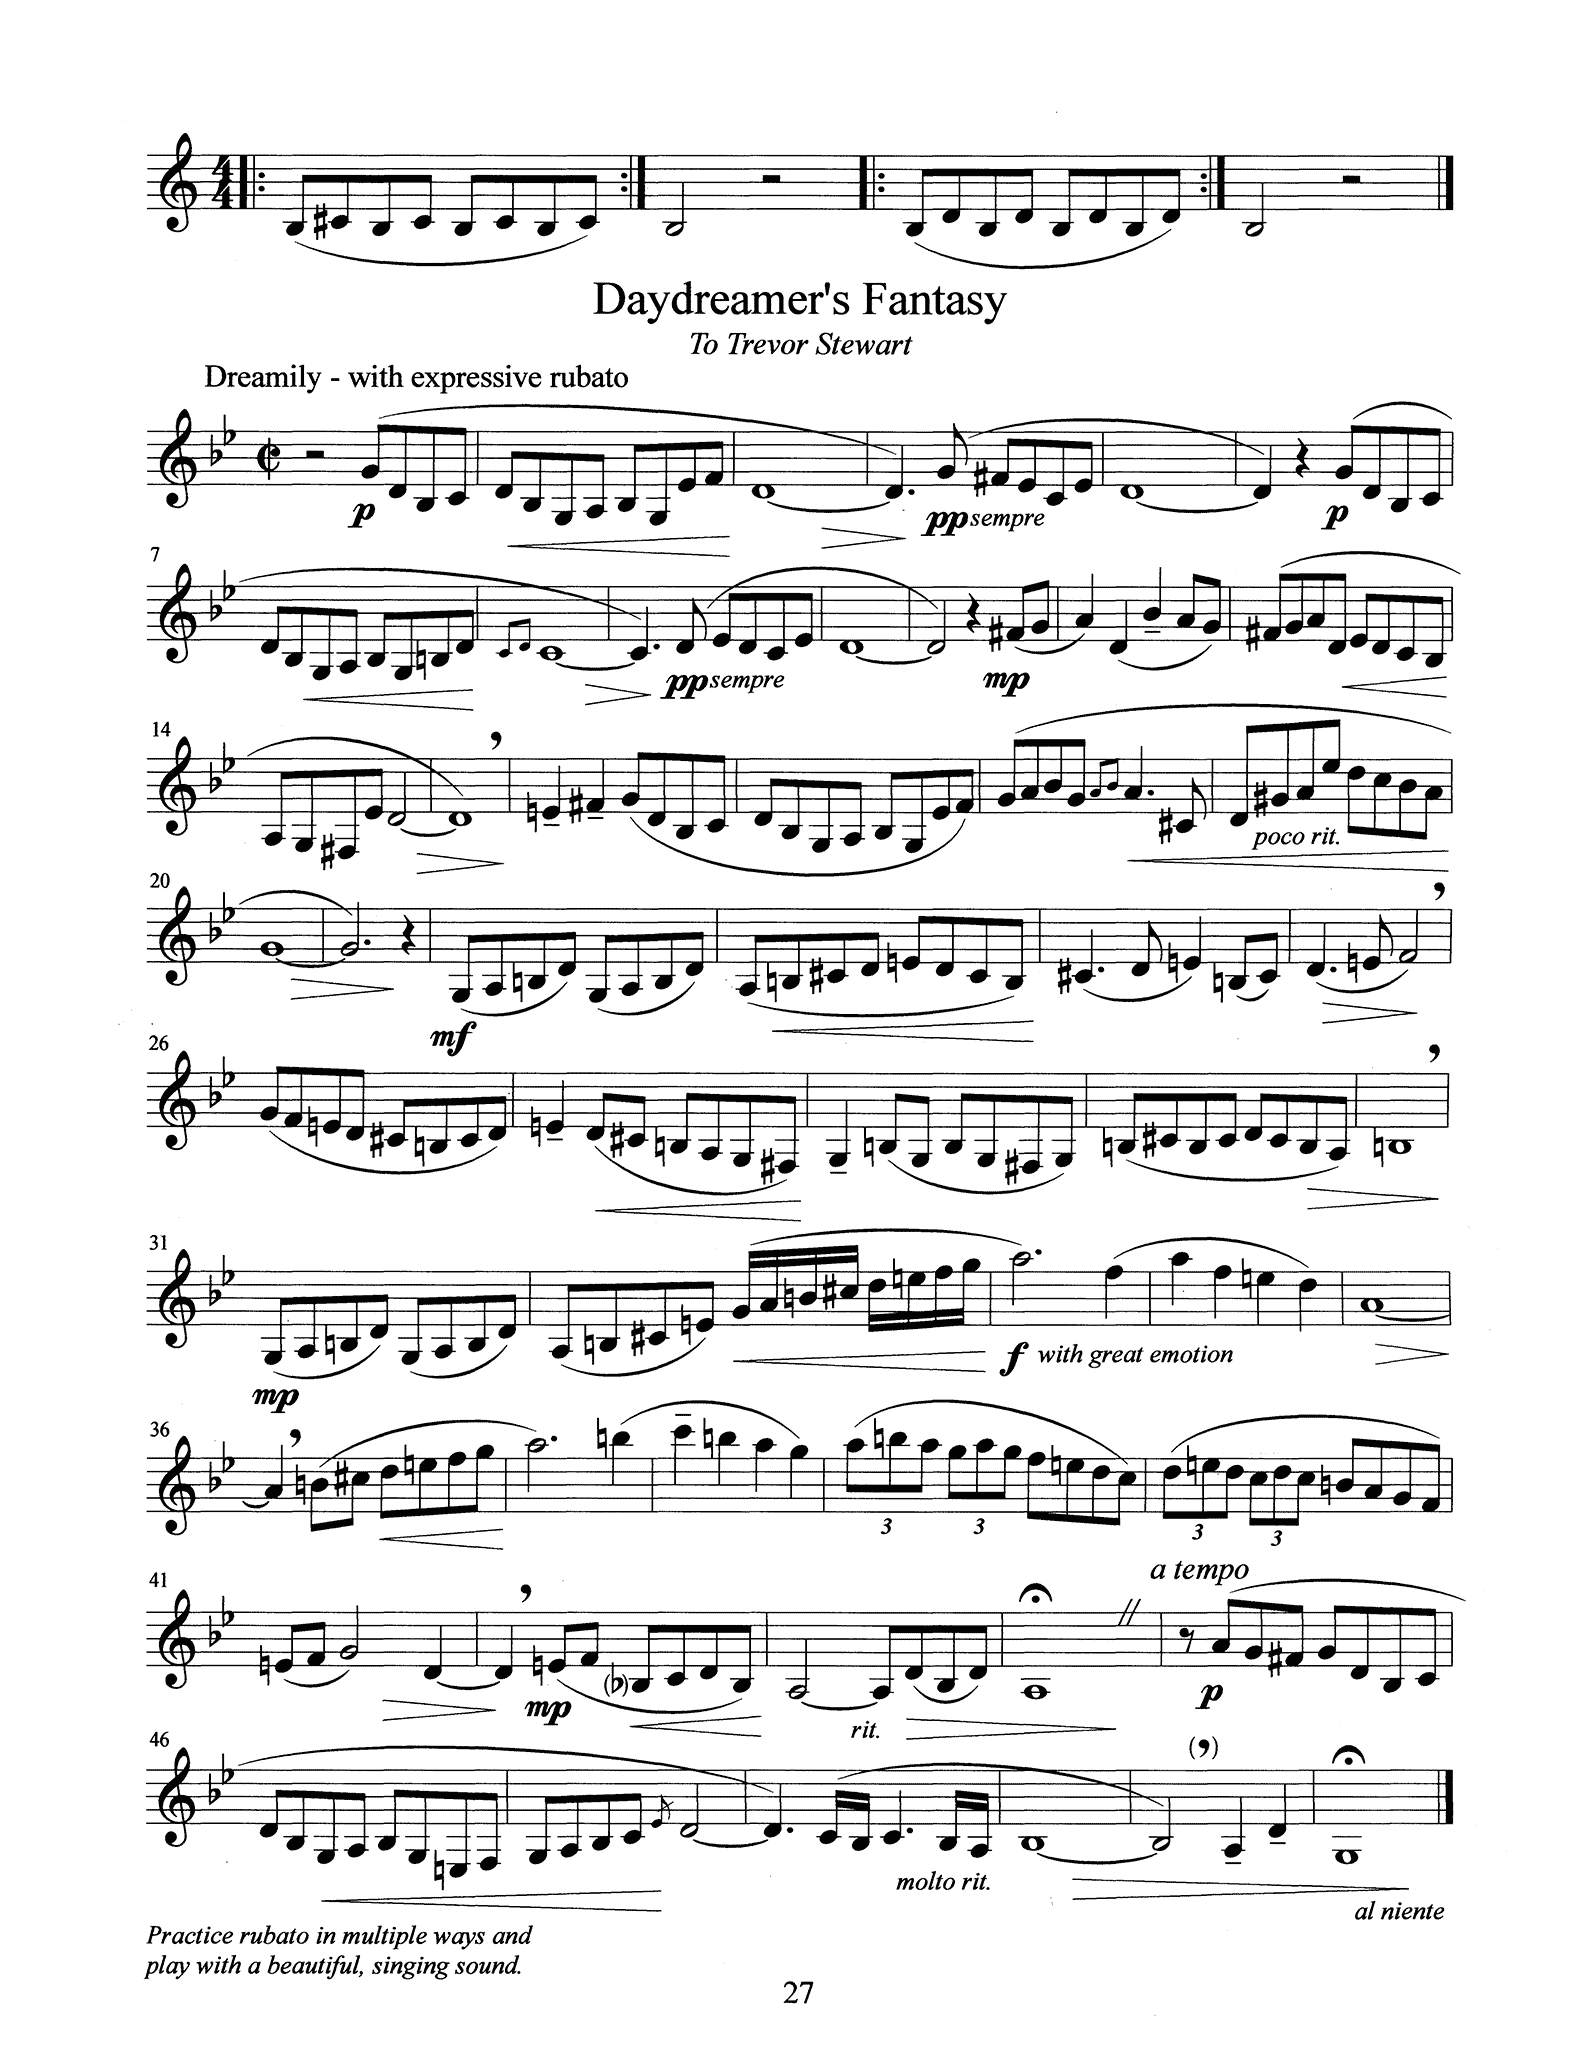 Denny-Chambers Finger Fitness Clarinet Études Page 27